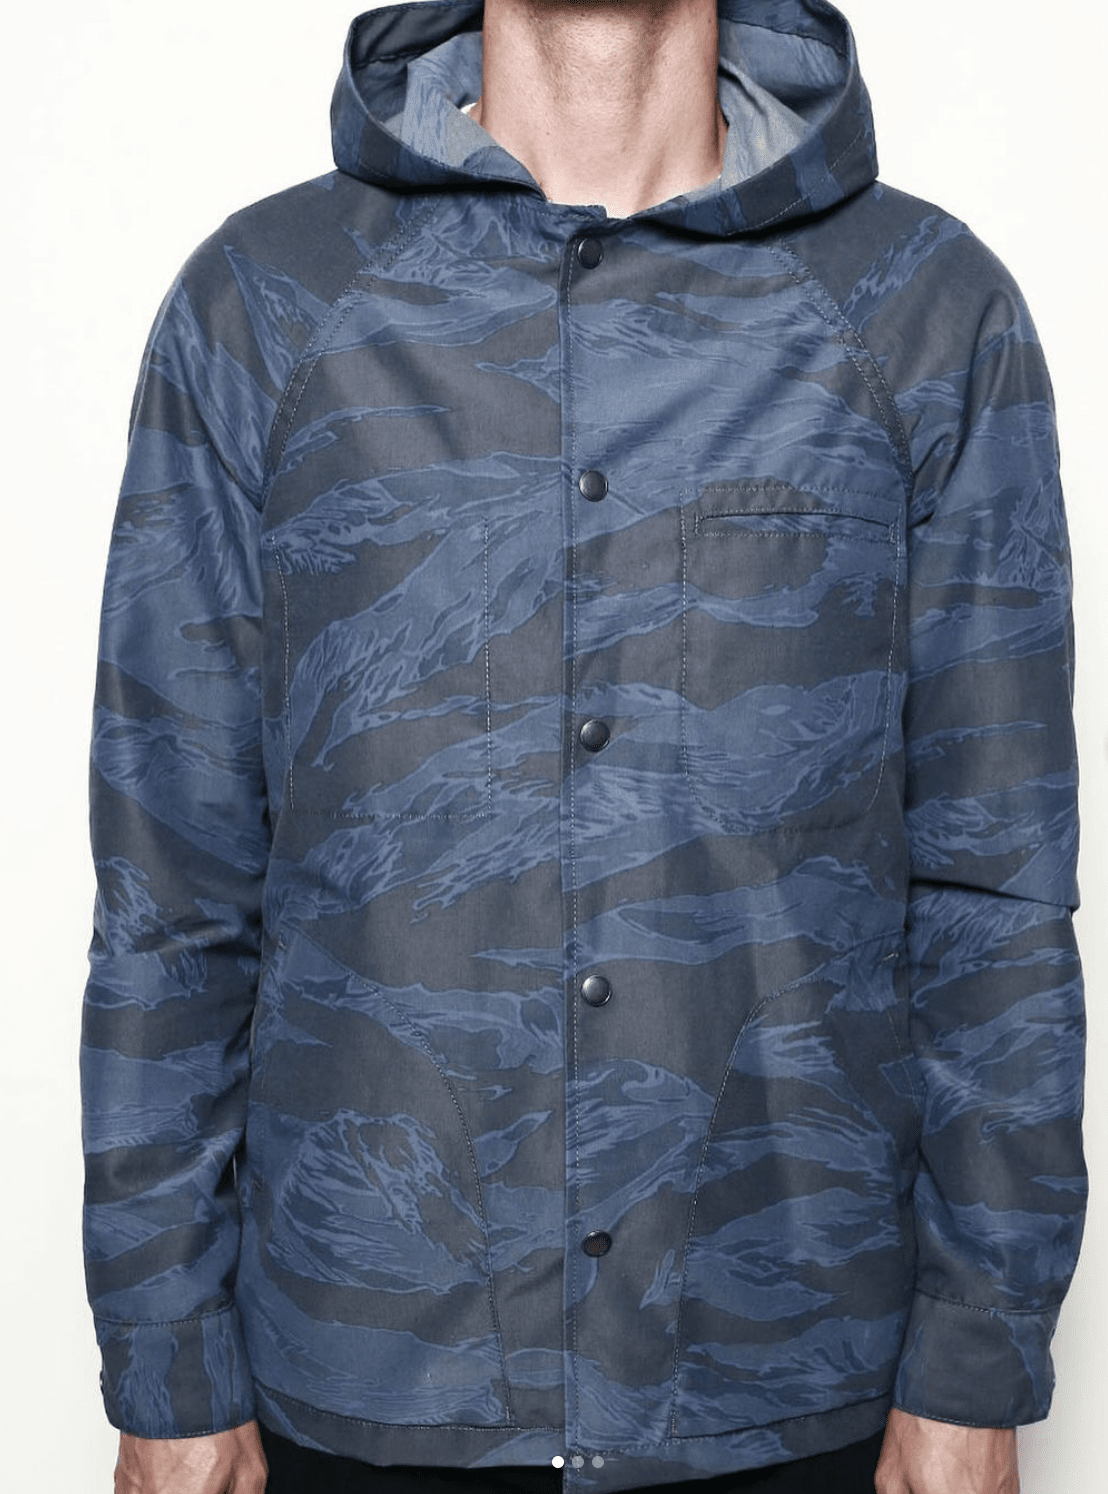 Rogue Territory - Hooded Supply Jacket Tiger Camo Blue - City Workshop Men's Supply Co.